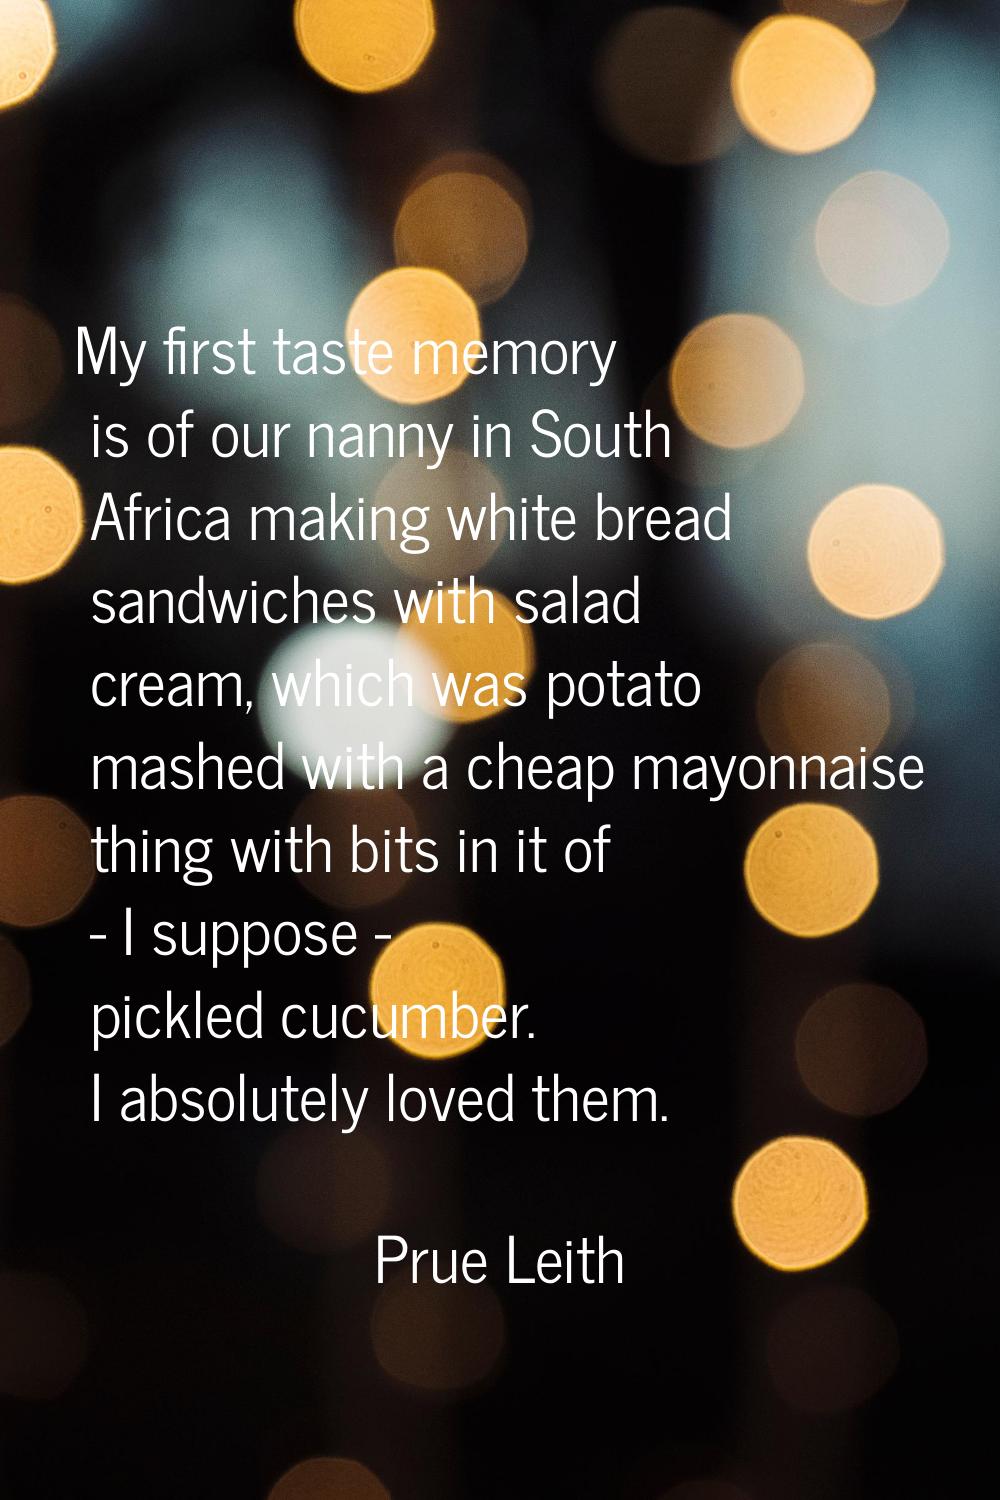 My first taste memory is of our nanny in South Africa making white bread sandwiches with salad crea